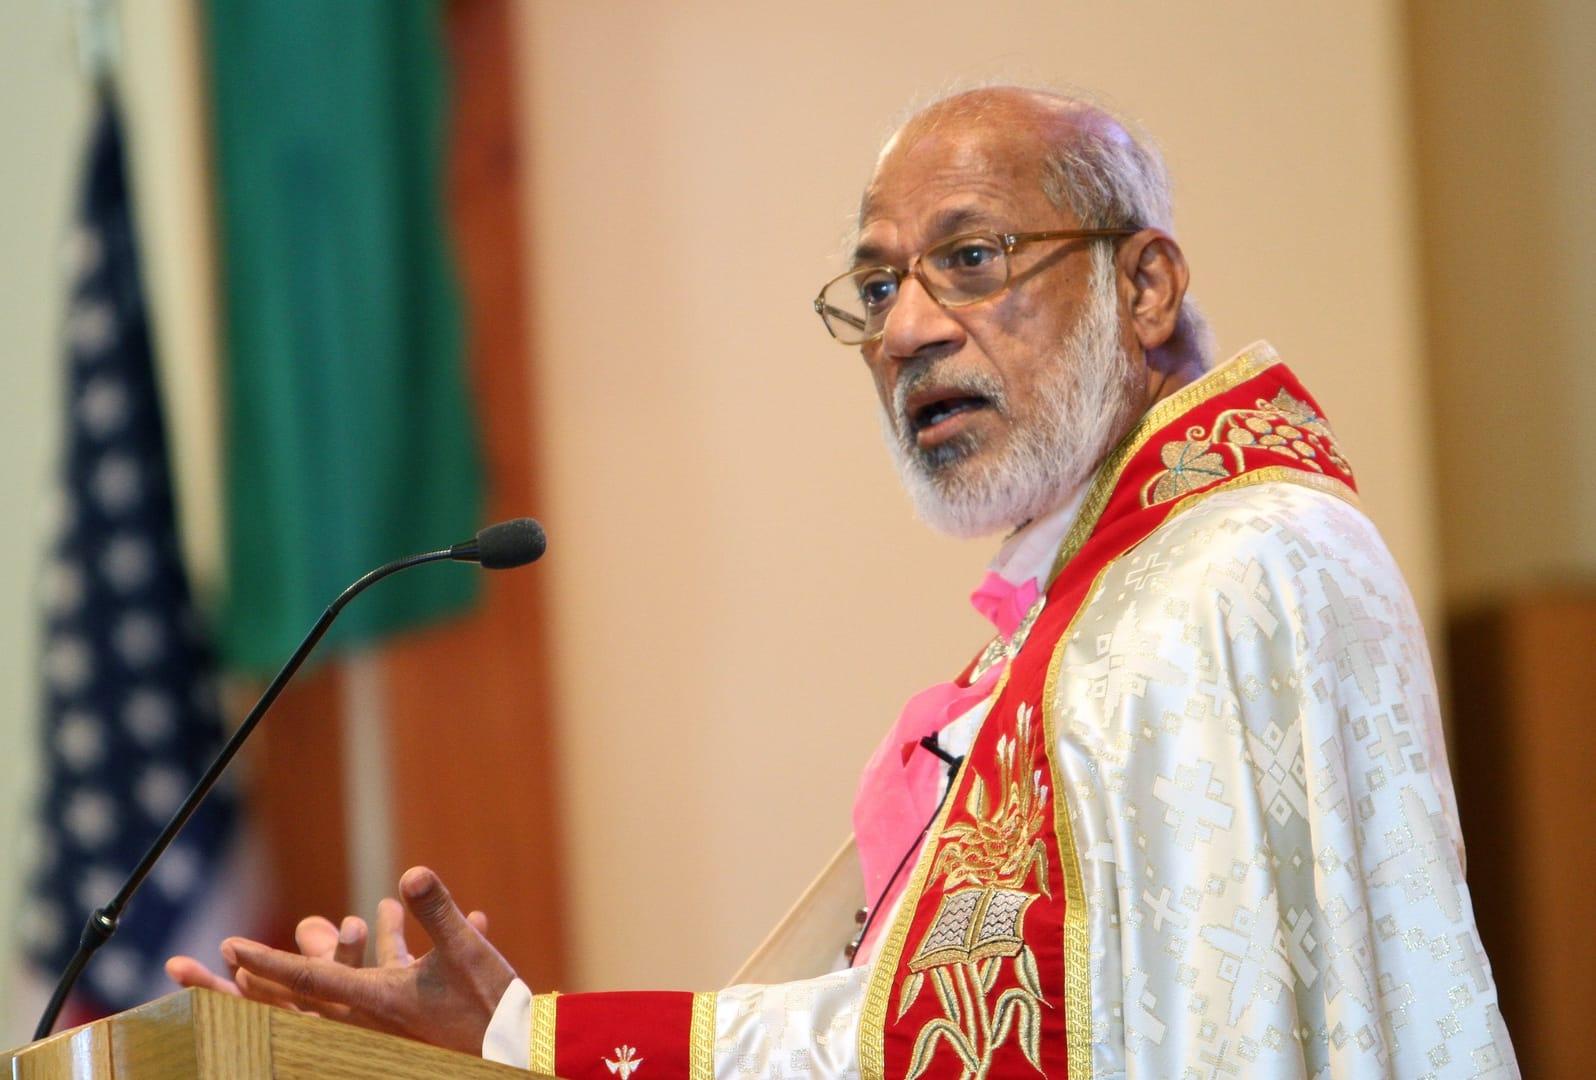 Court says Indian cardinal must appear to face charges on land deals